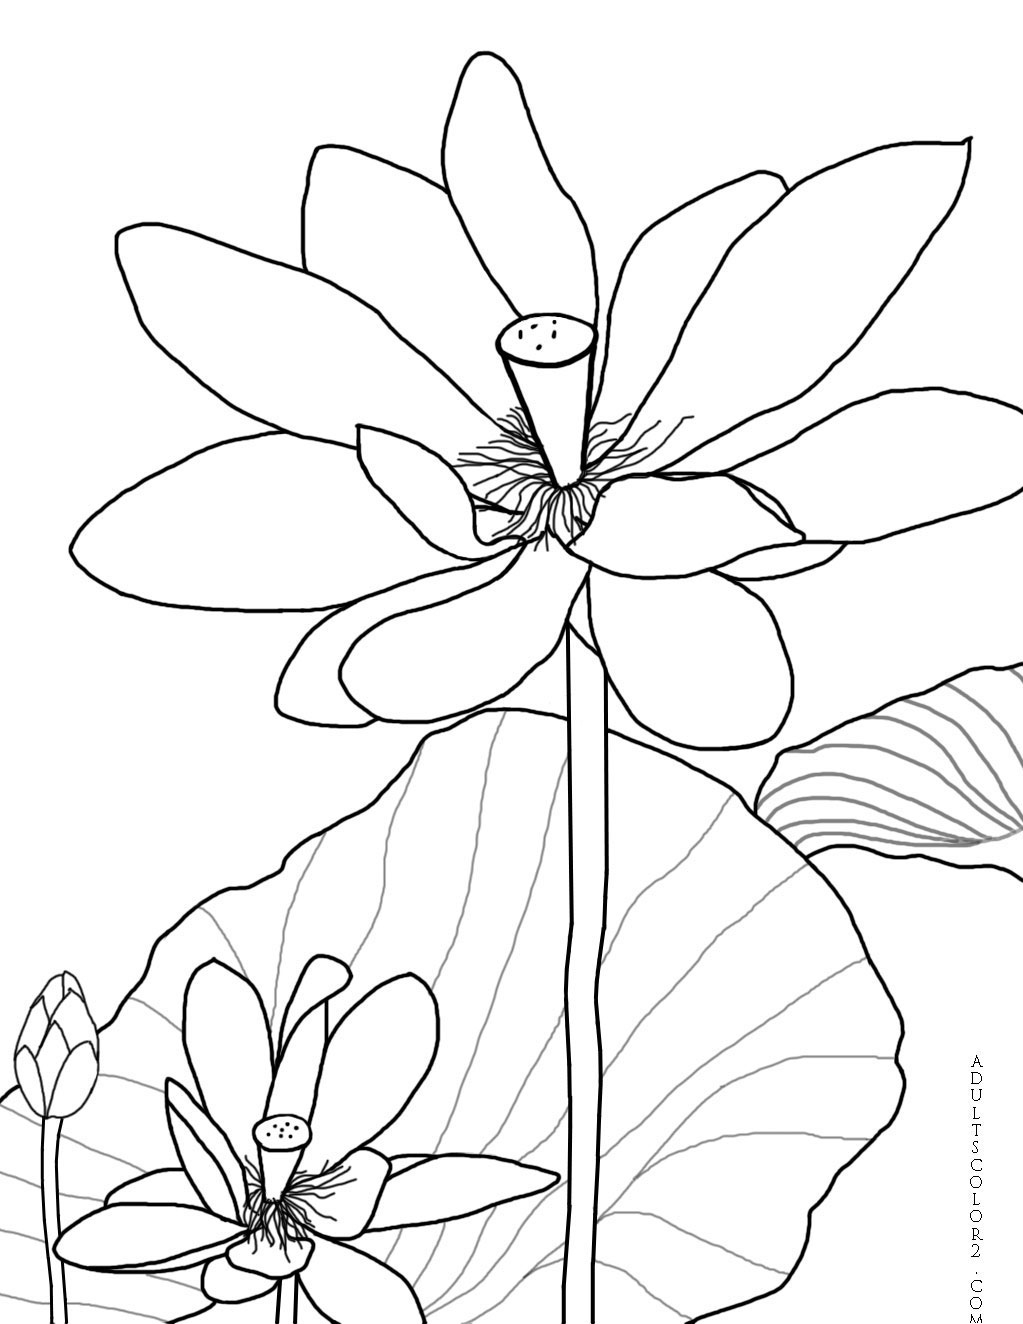 Lotus flower or water lily coloring page